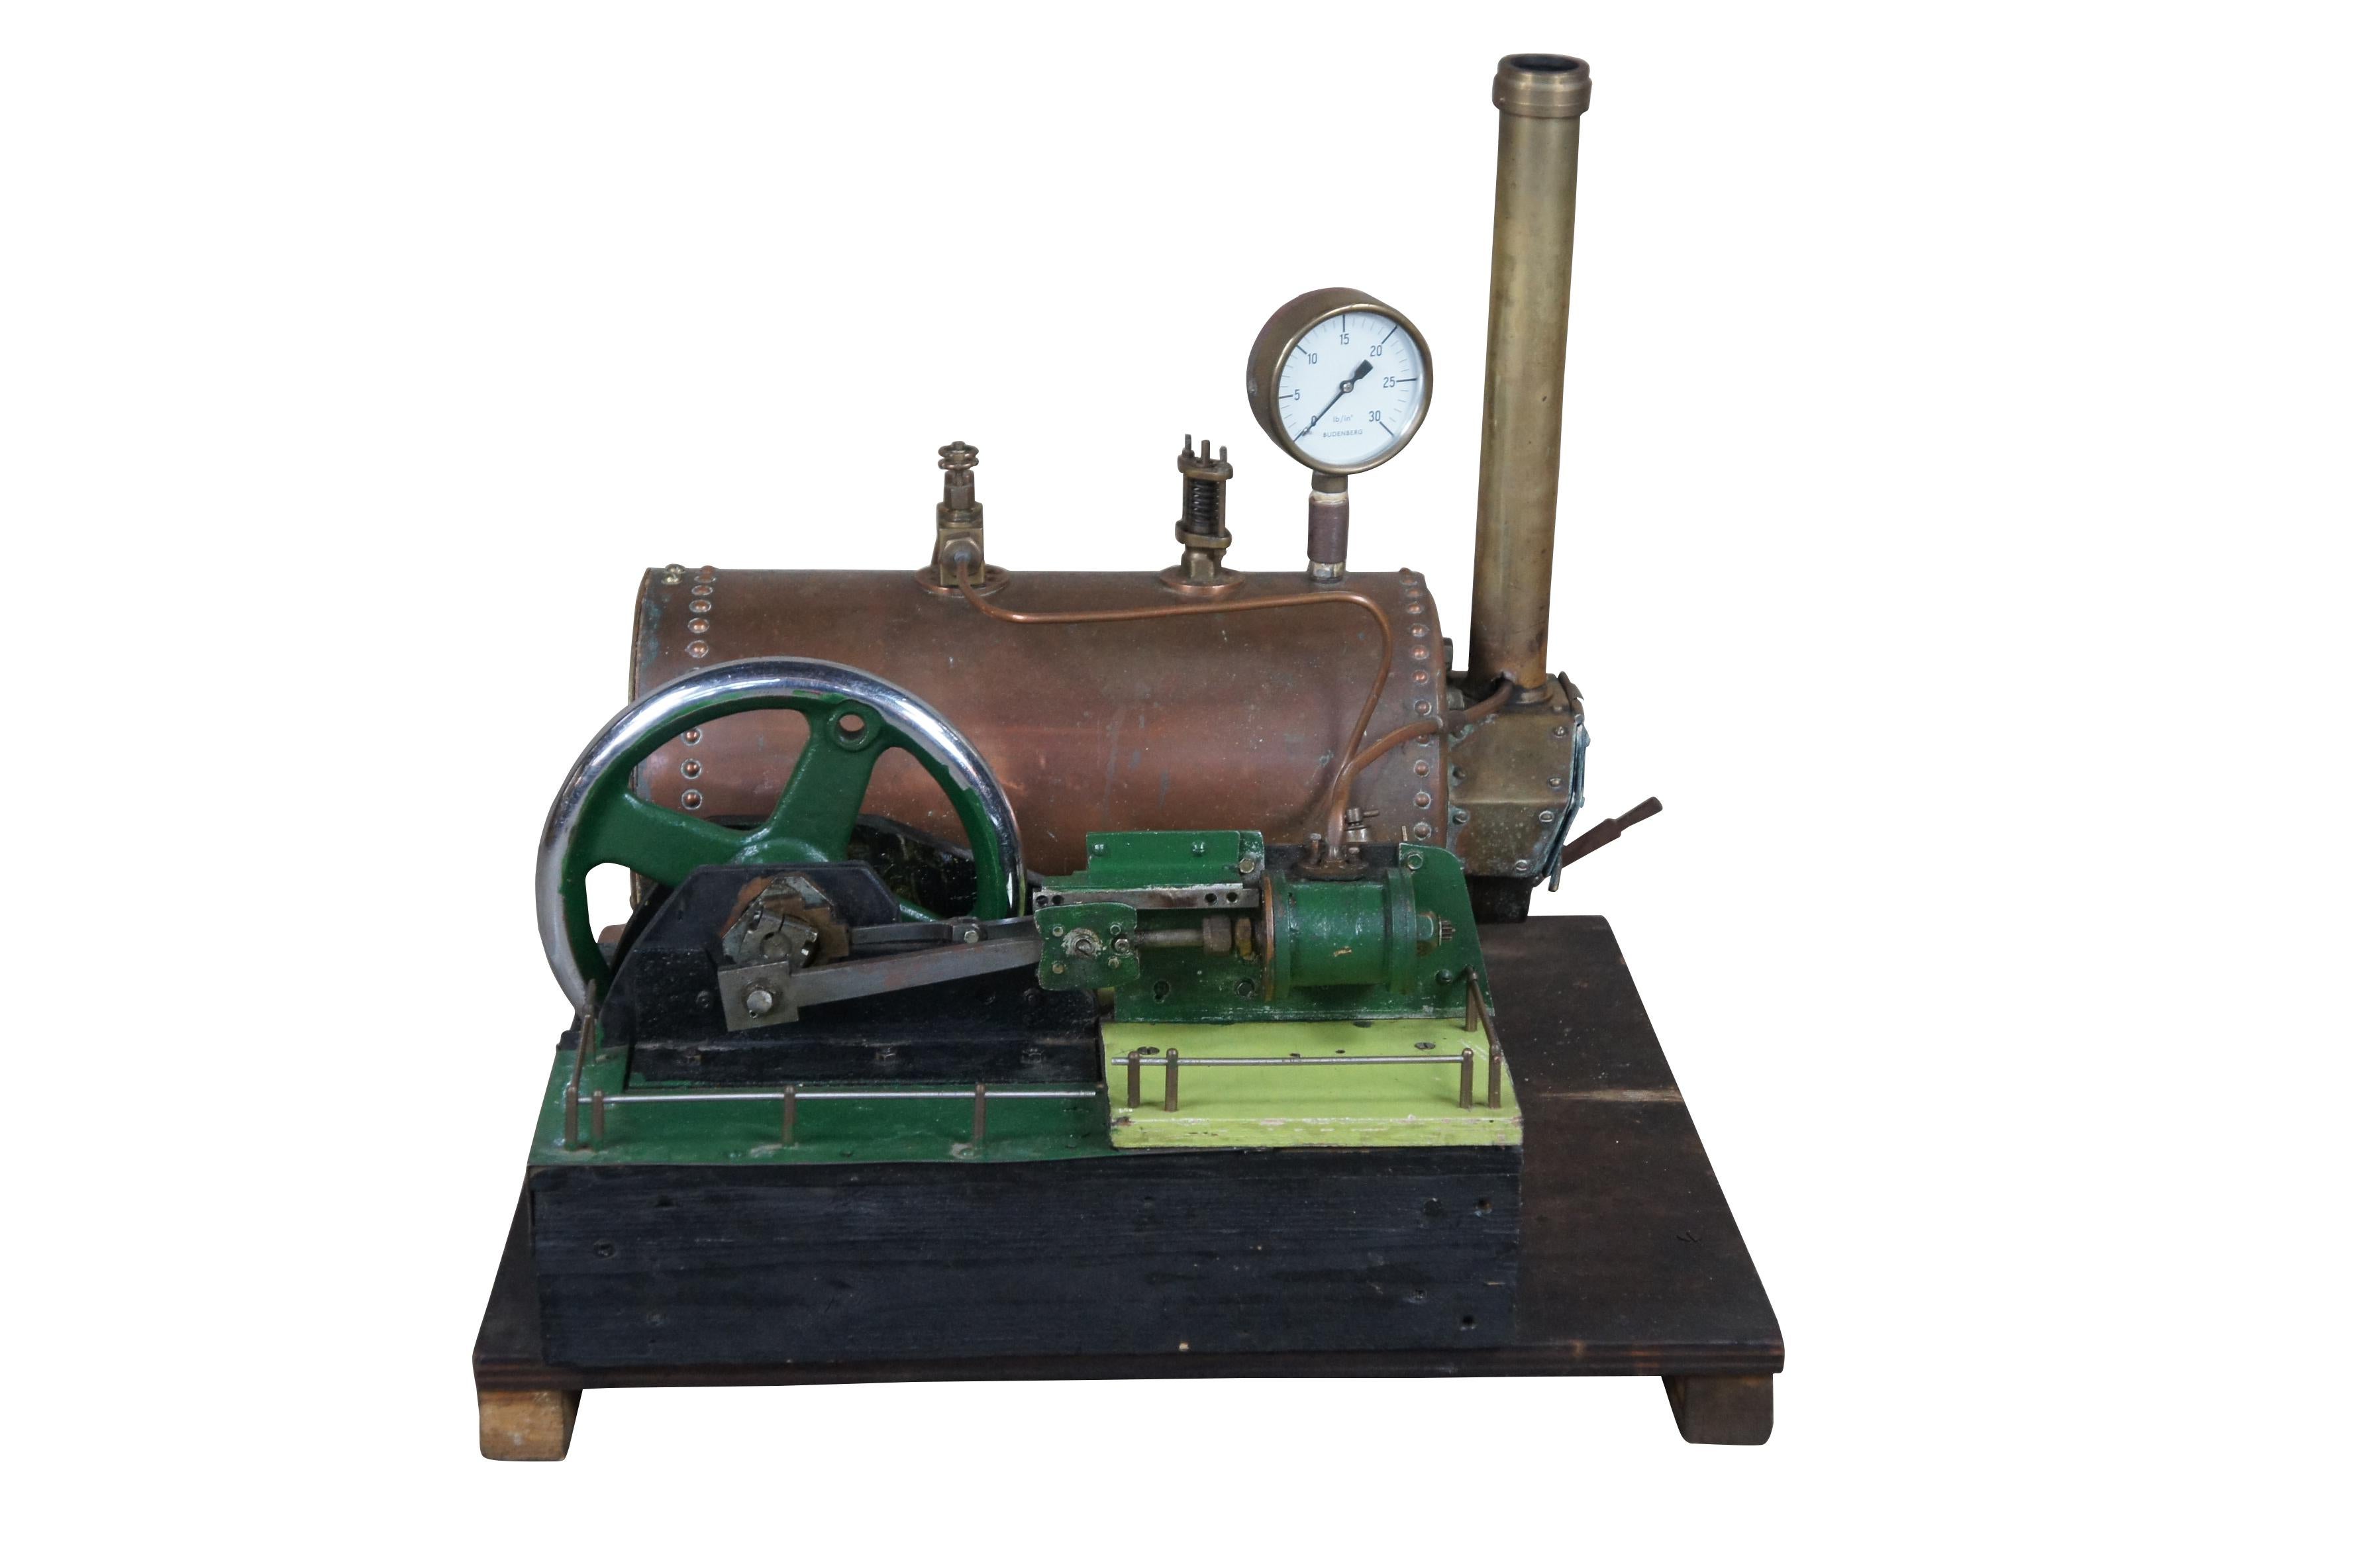 Antique 19th century Schaeffer & Budenberg stationary steam engine model.  Made of cast iron featuring copper boiler

The Budenberg Gauge Company was founded in 1918. The original parent company was Schäffer & Budenberg founded in 1850 by Bernhard